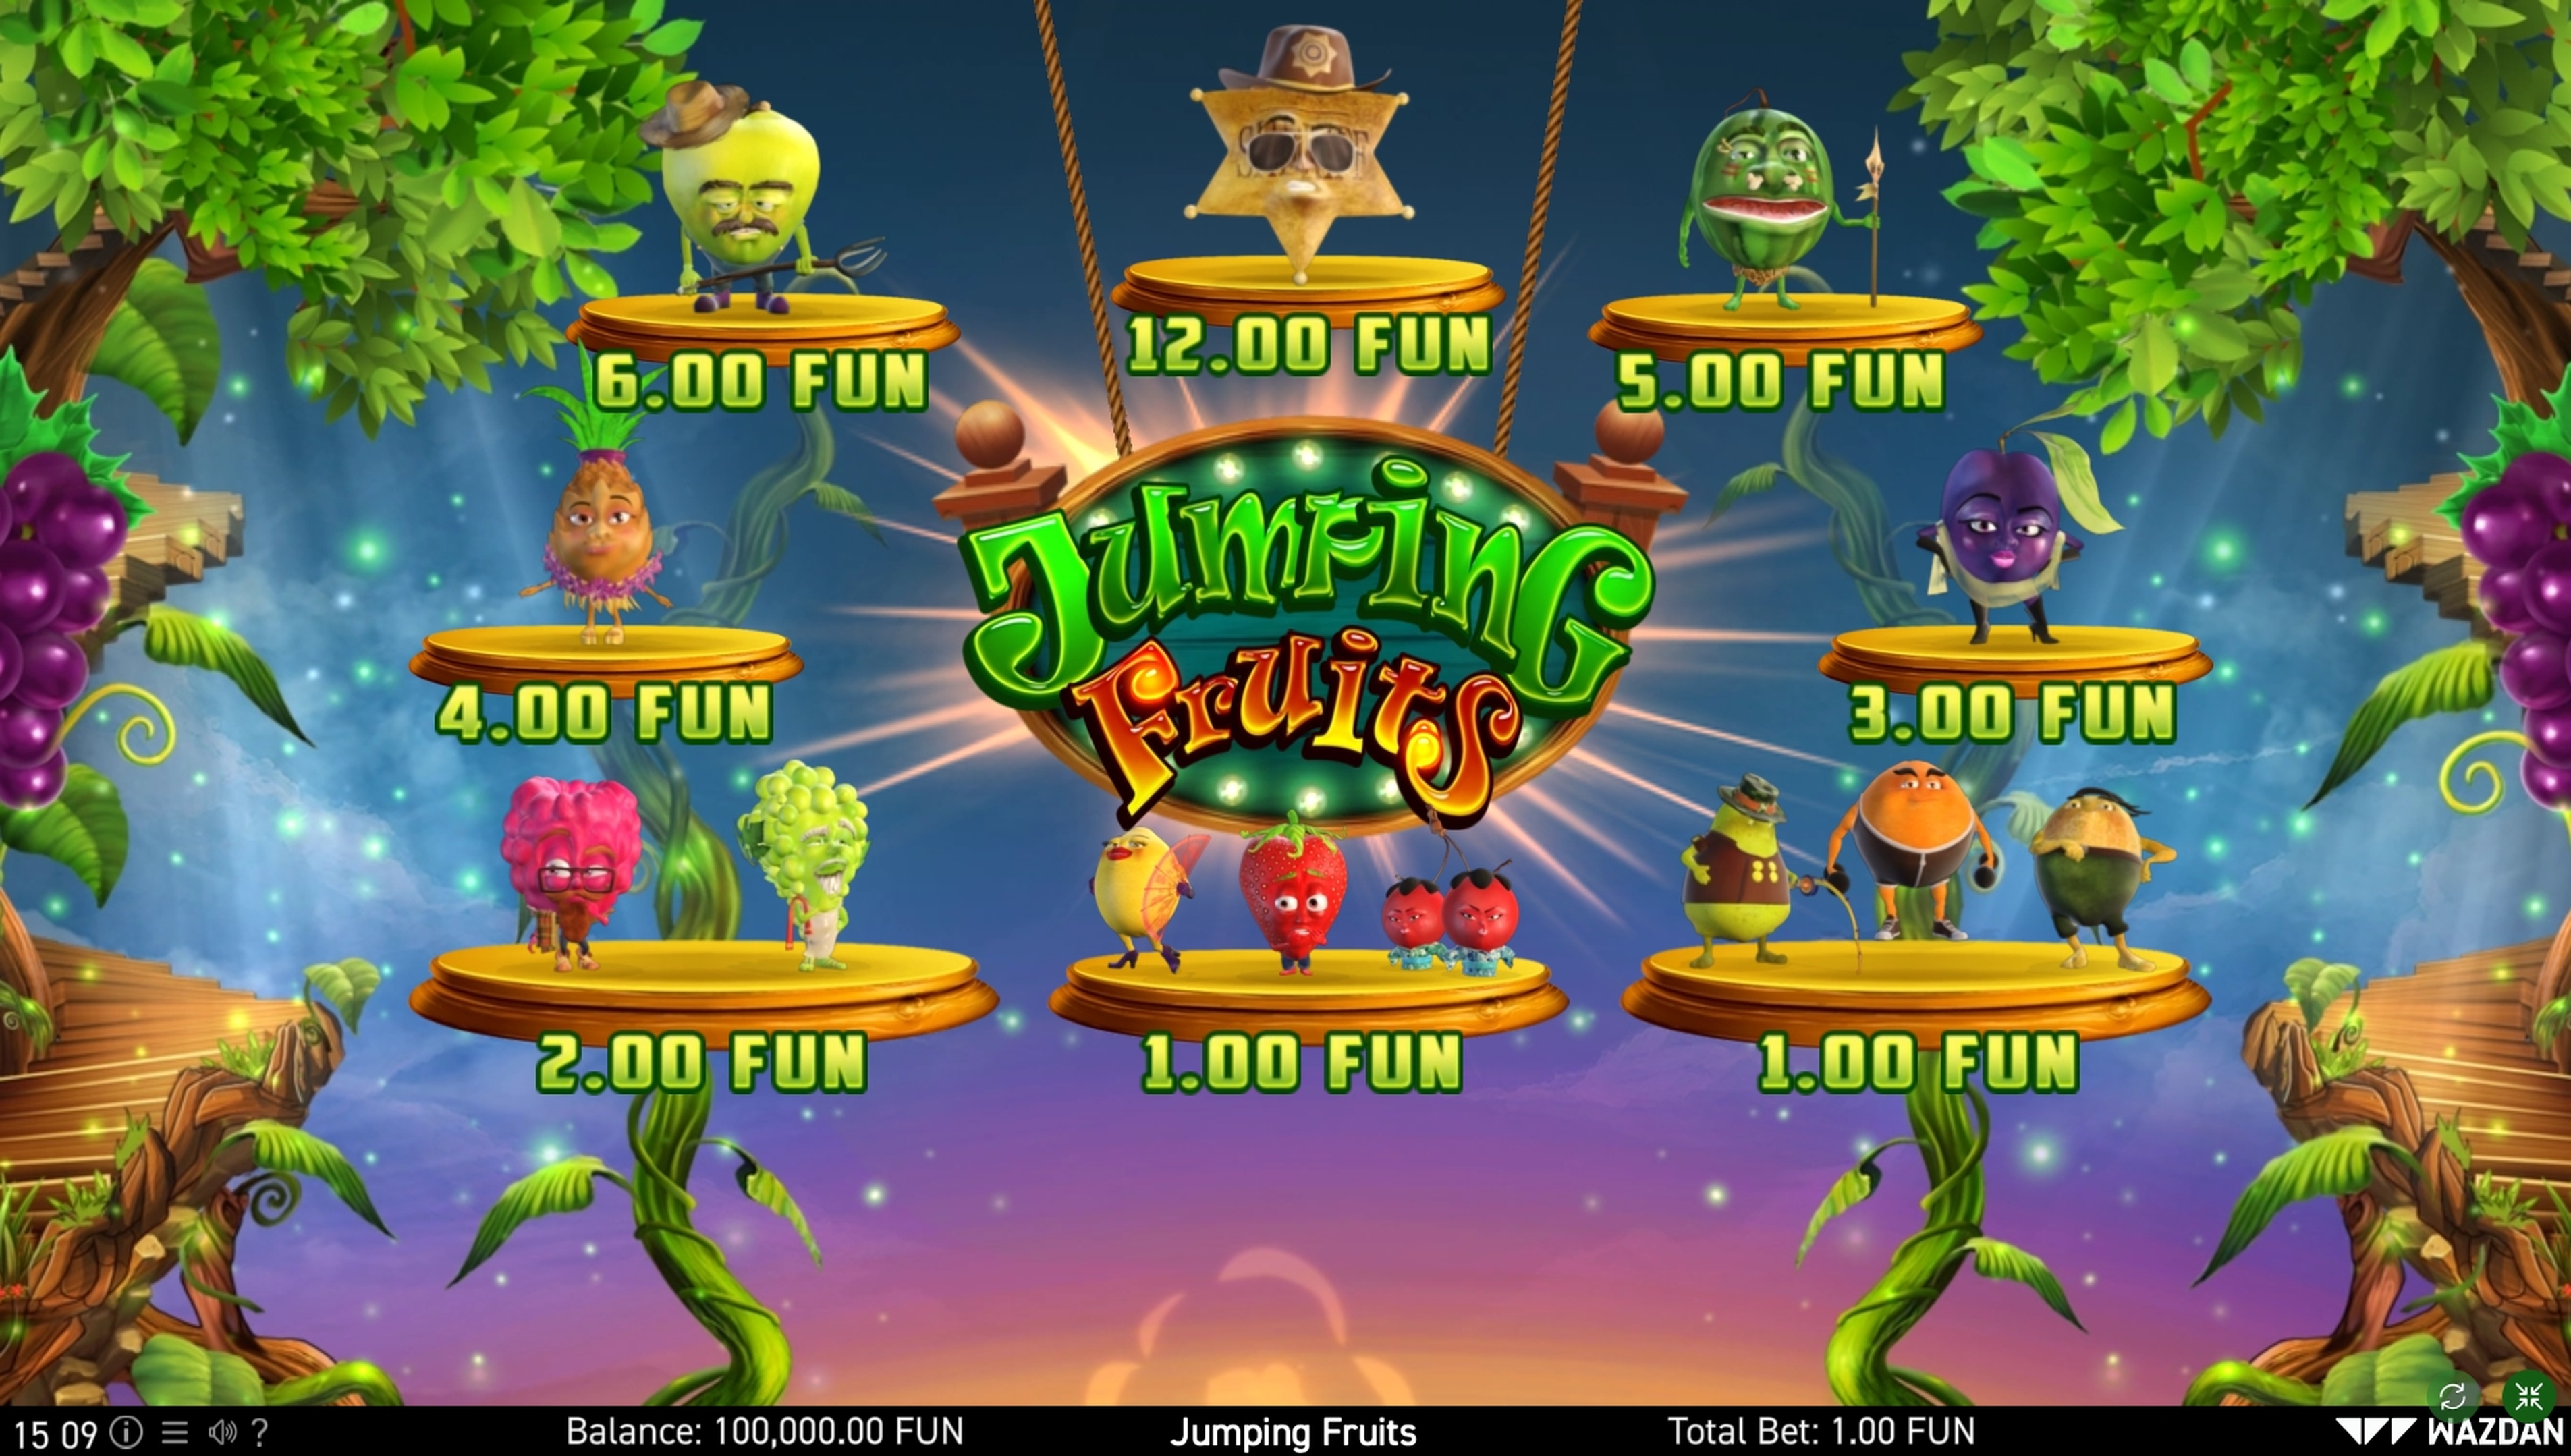 Info of Jumping Fruits Slot Game by Wazdan